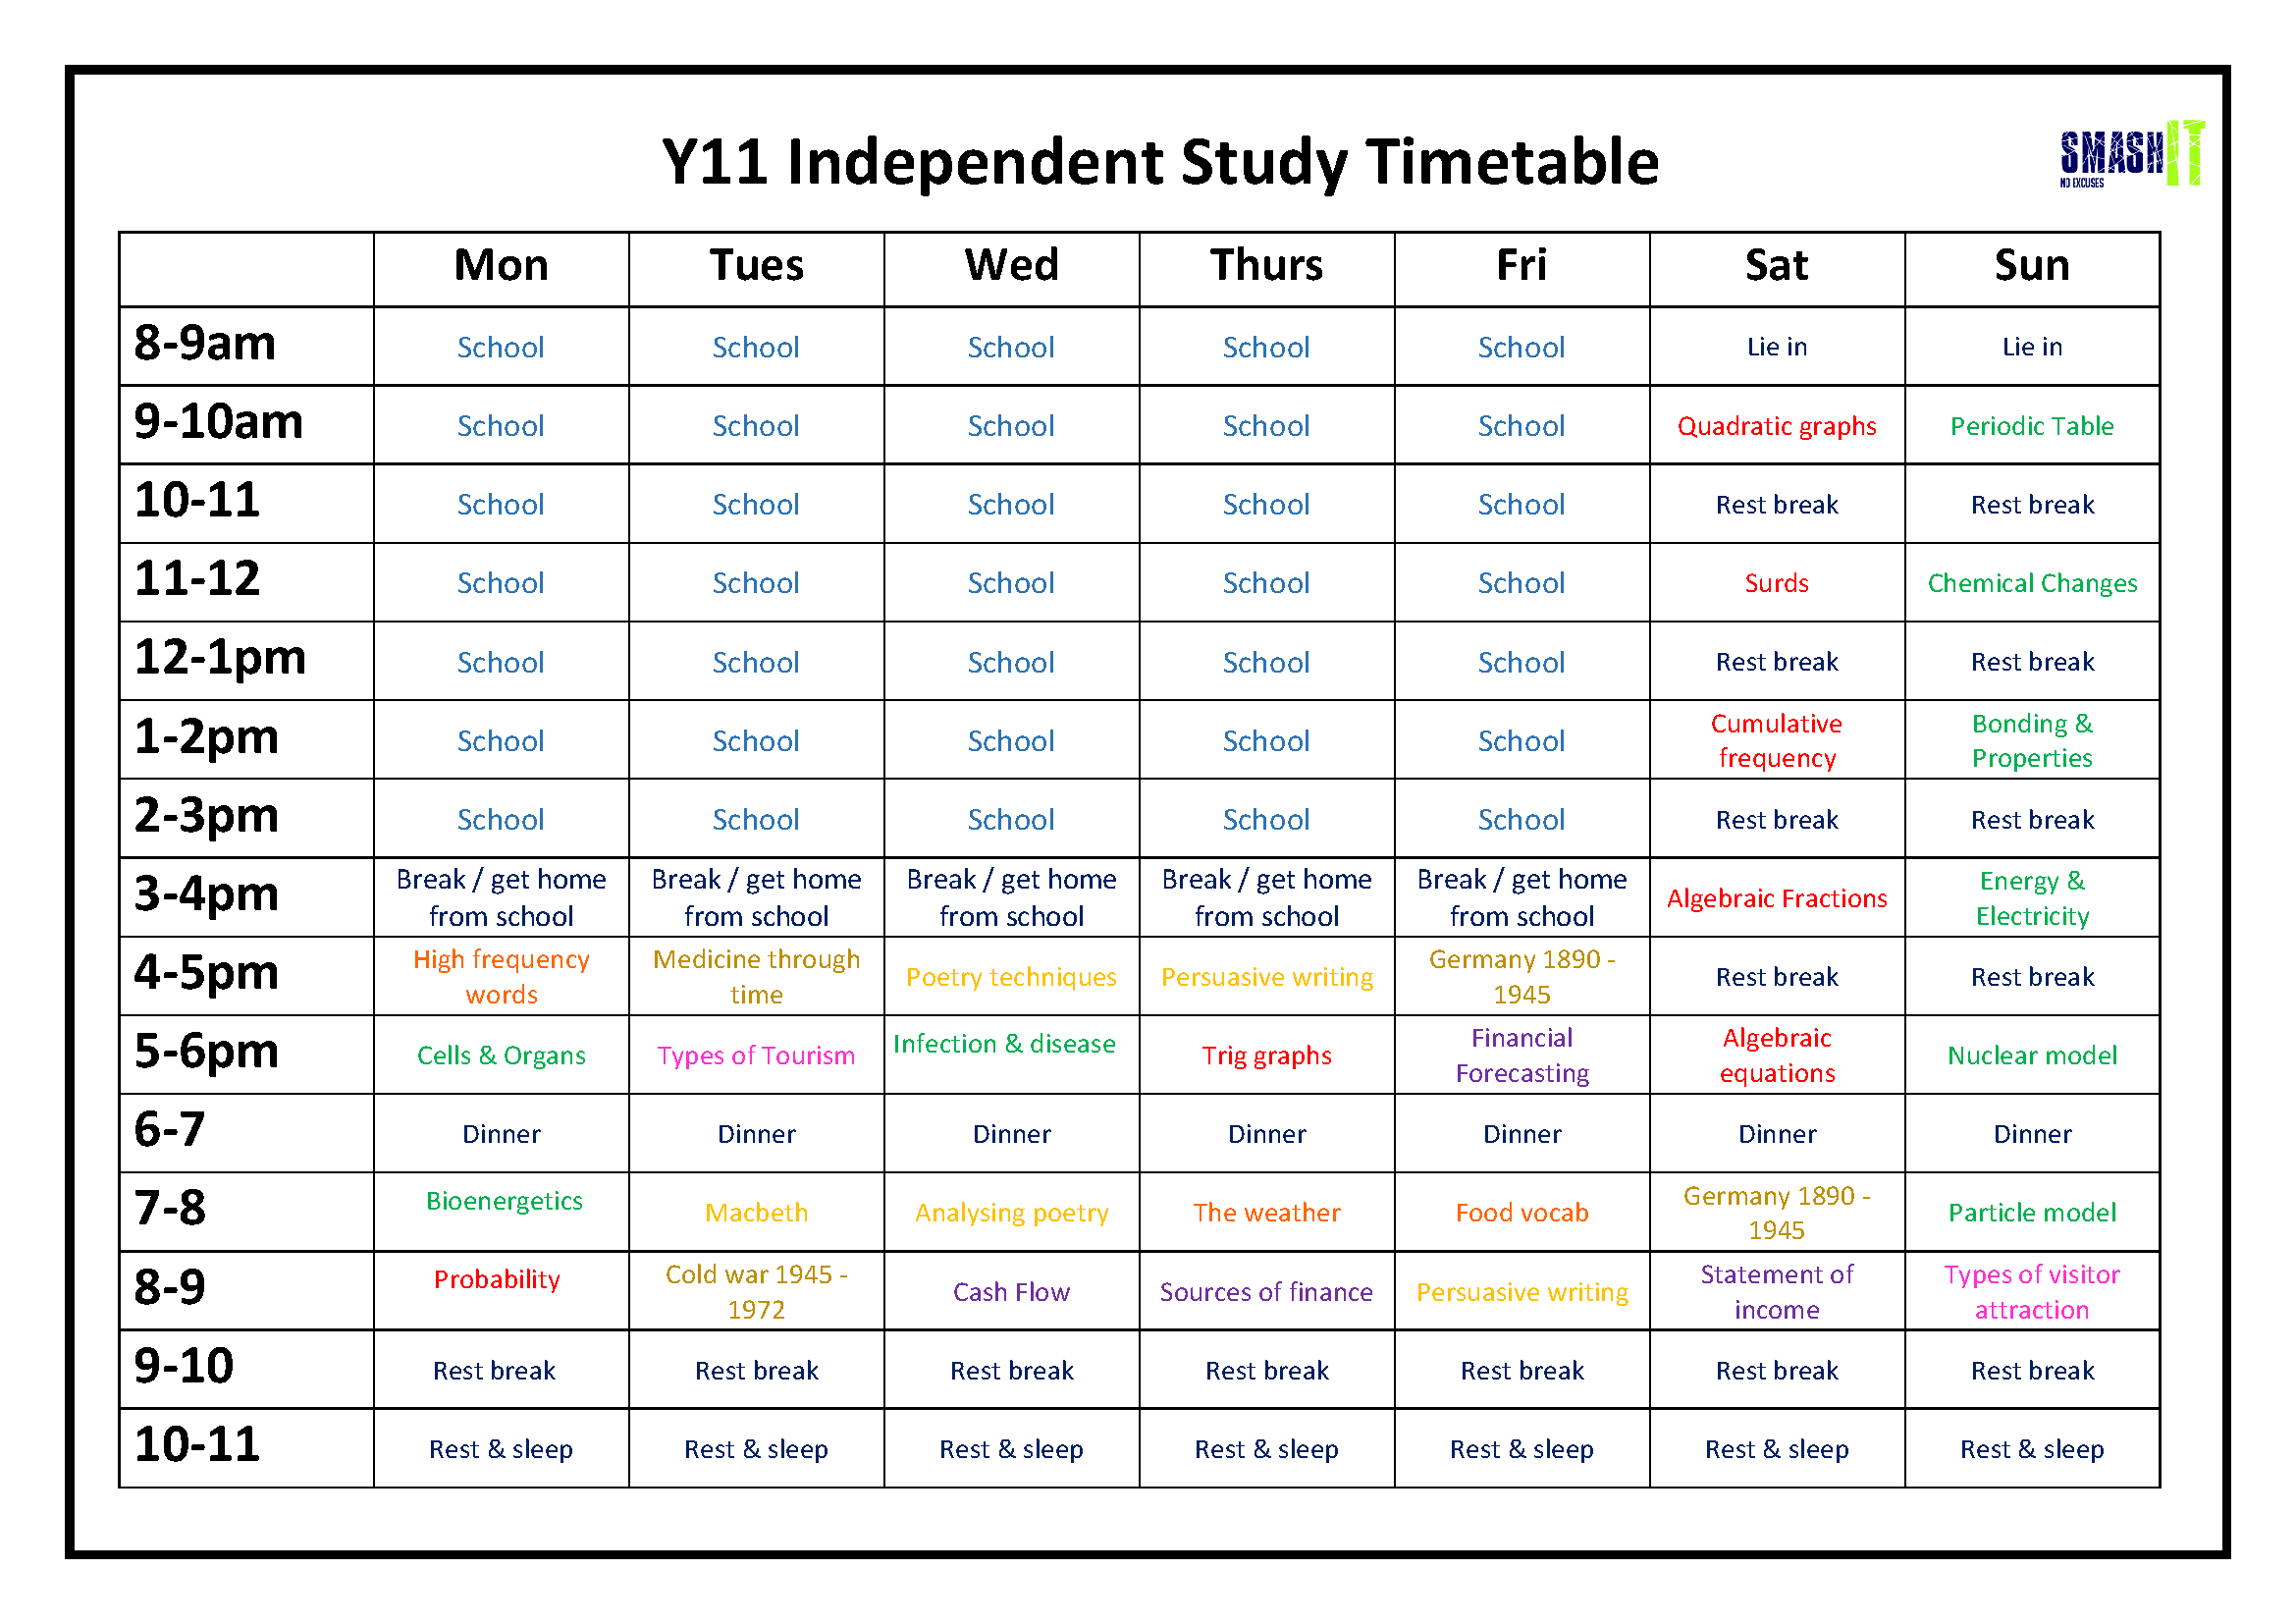 Y11 Independent Study Timetable   example